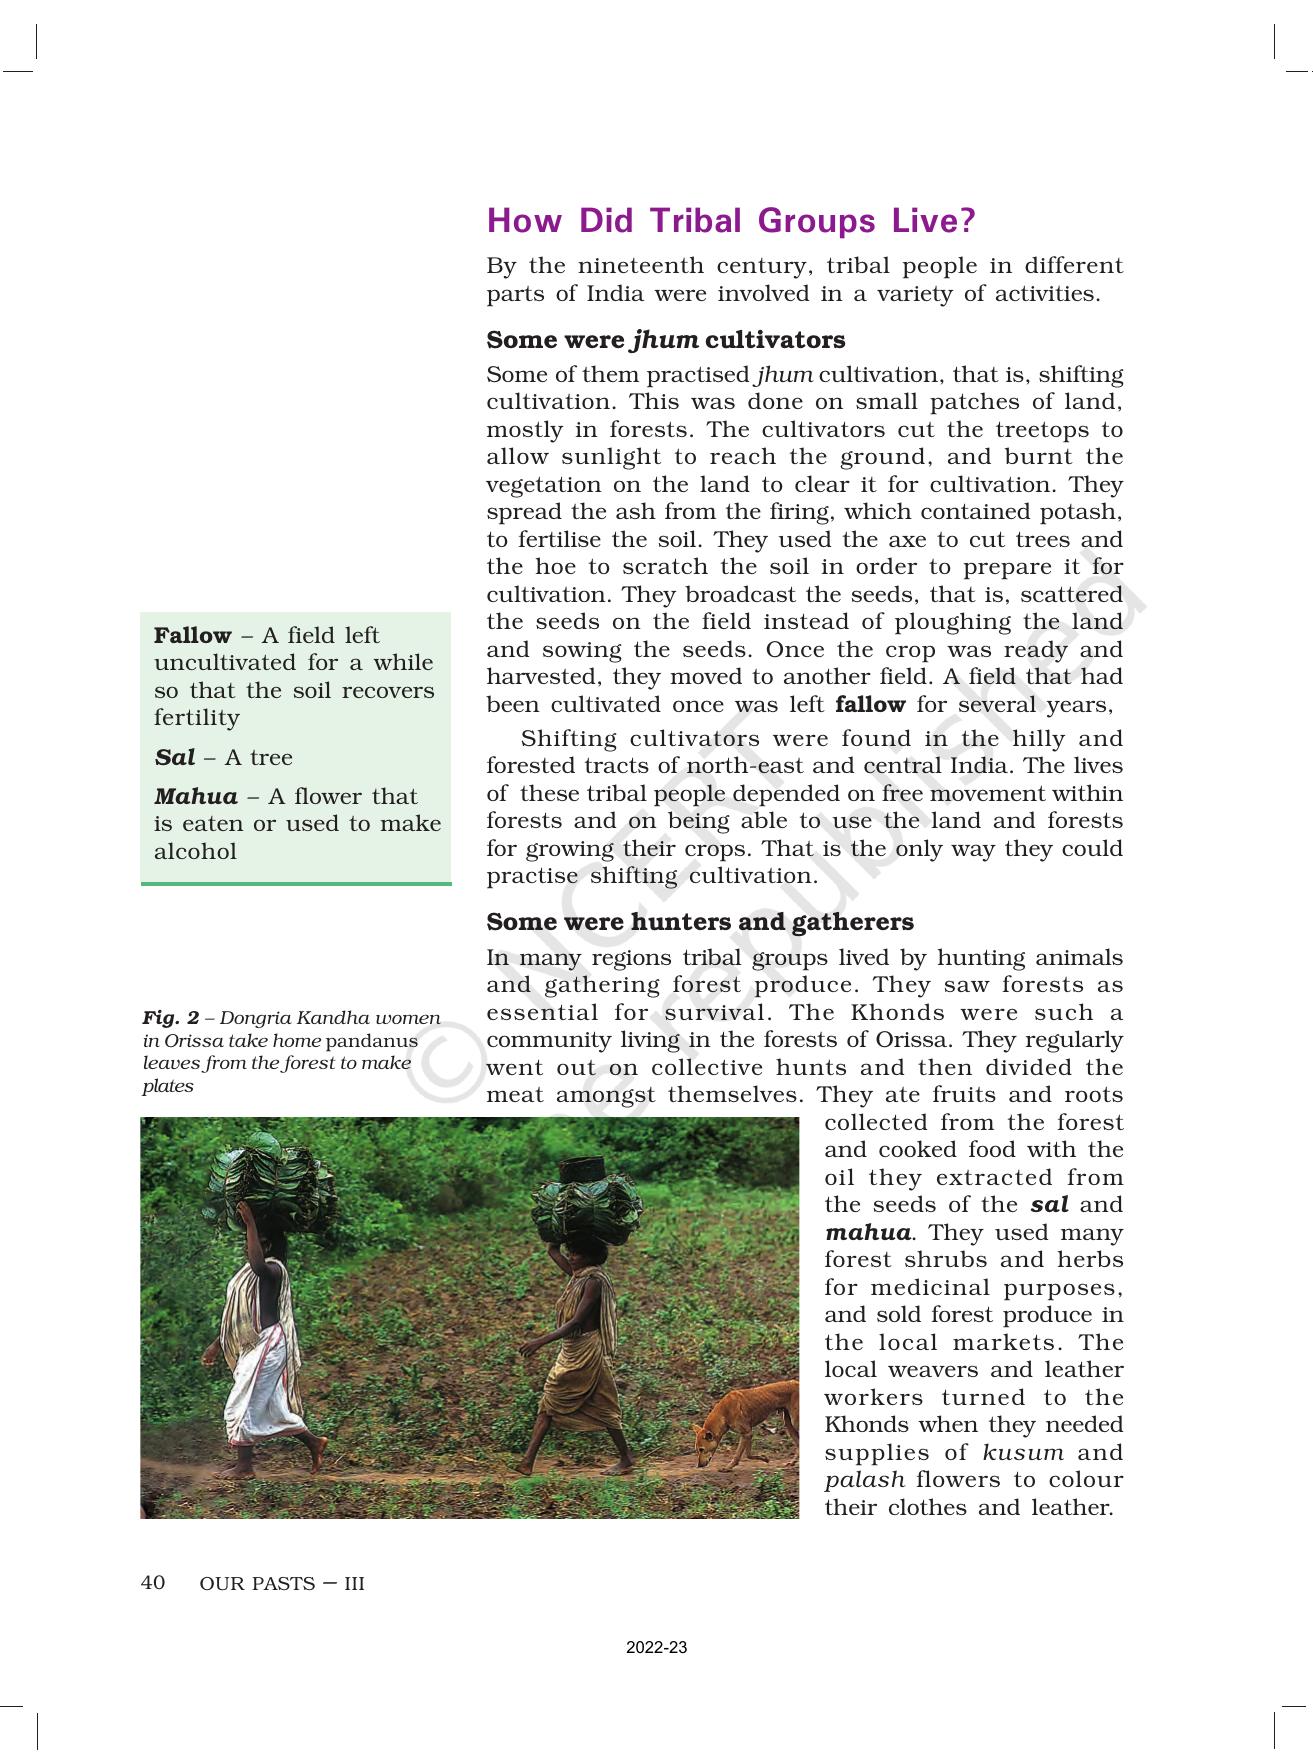 NCERT Book for Class 8 History Chapter 4 Tribals, Dikus and the Vision of a Golden Age - Page 2